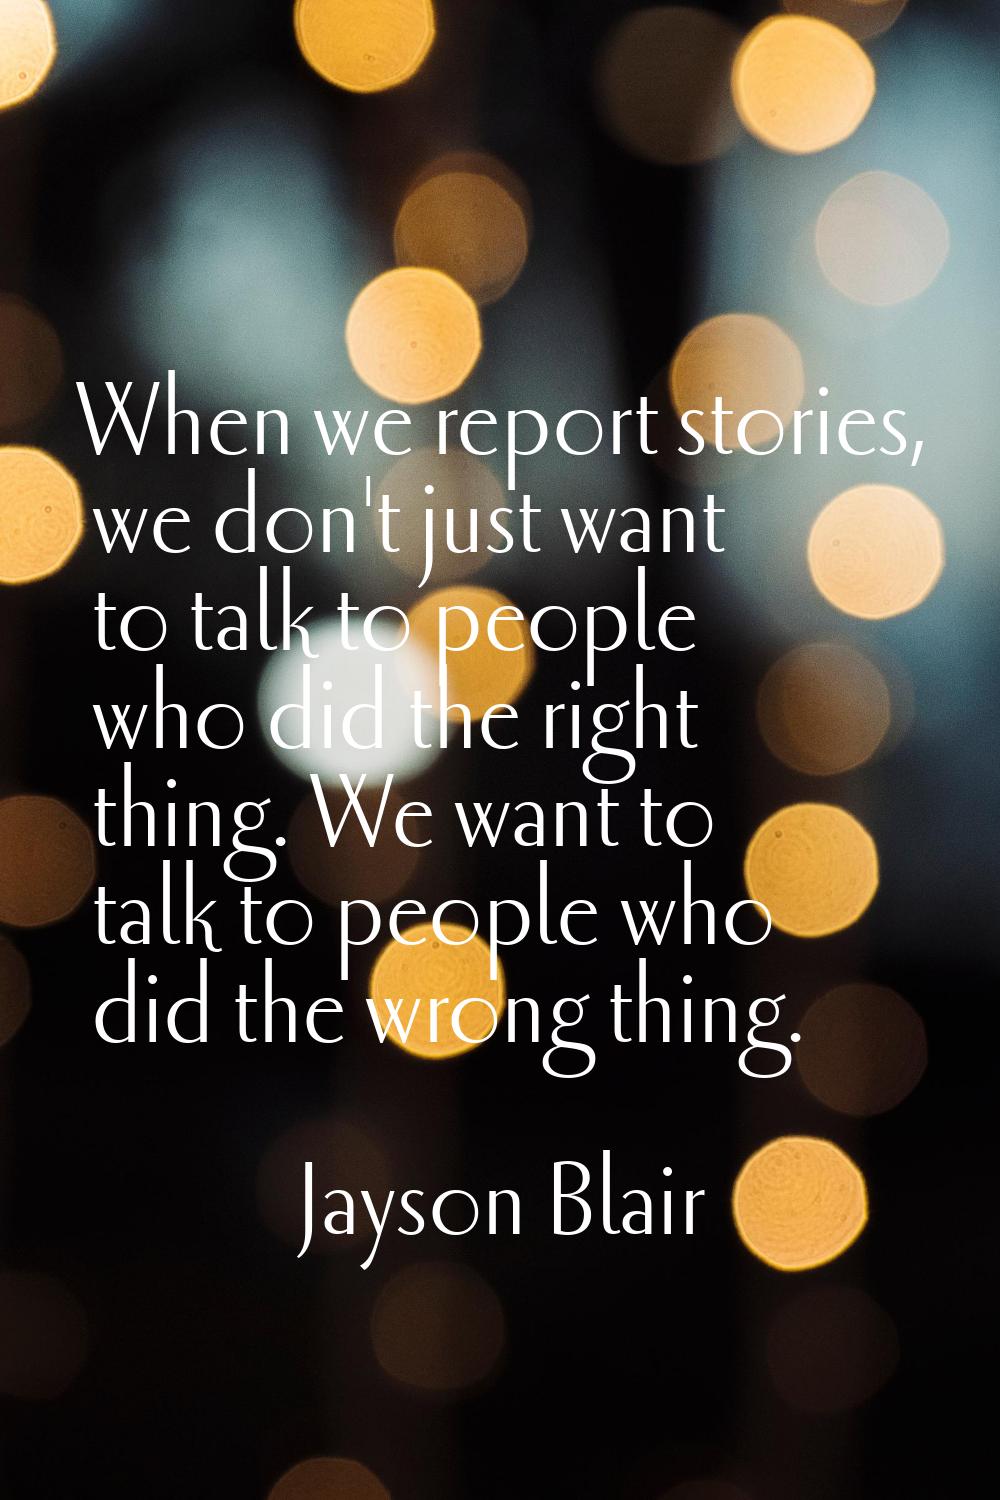 When we report stories, we don't just want to talk to people who did the right thing. We want to ta